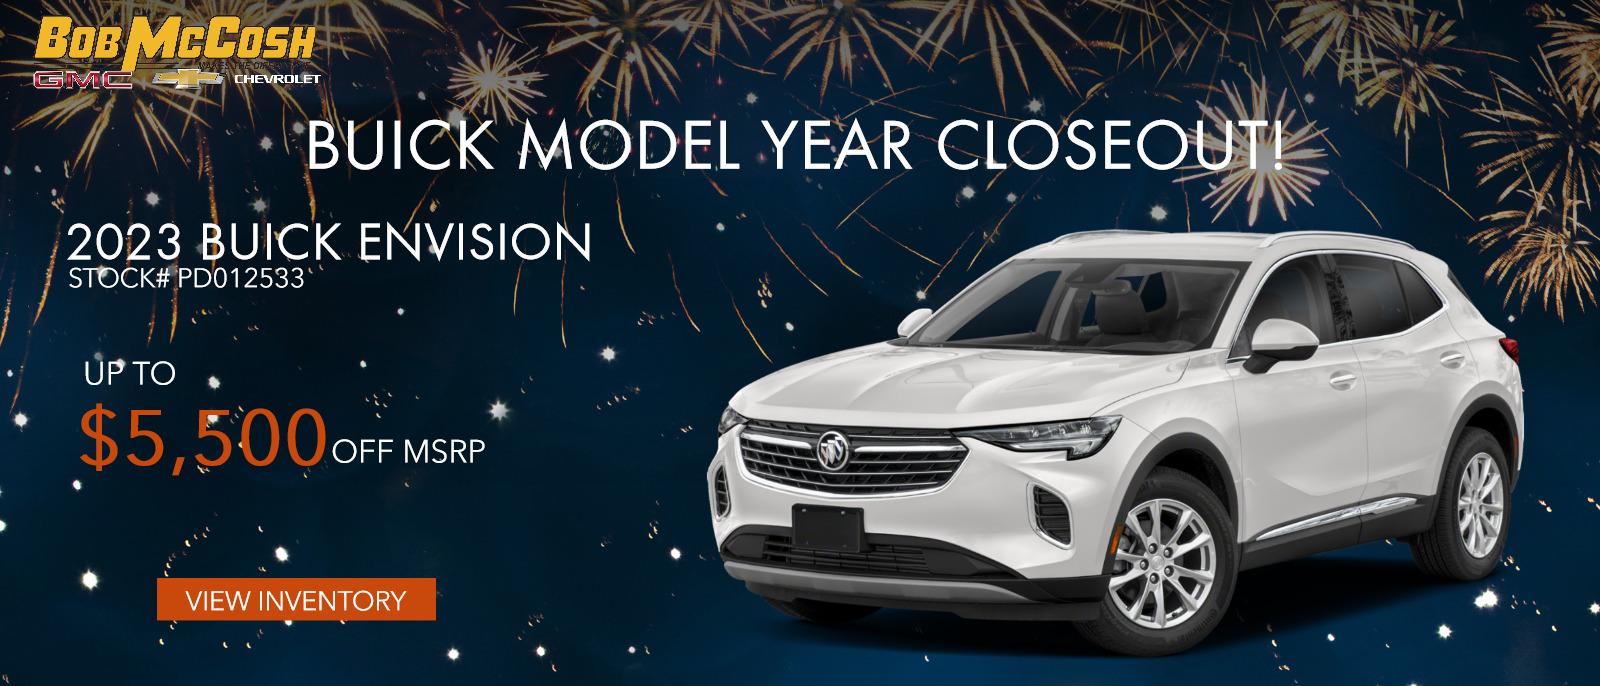 Buick Model Year Closeout!

2023 Buick Envision - Up to $5500 OFF MSRP

Stock# PD012533